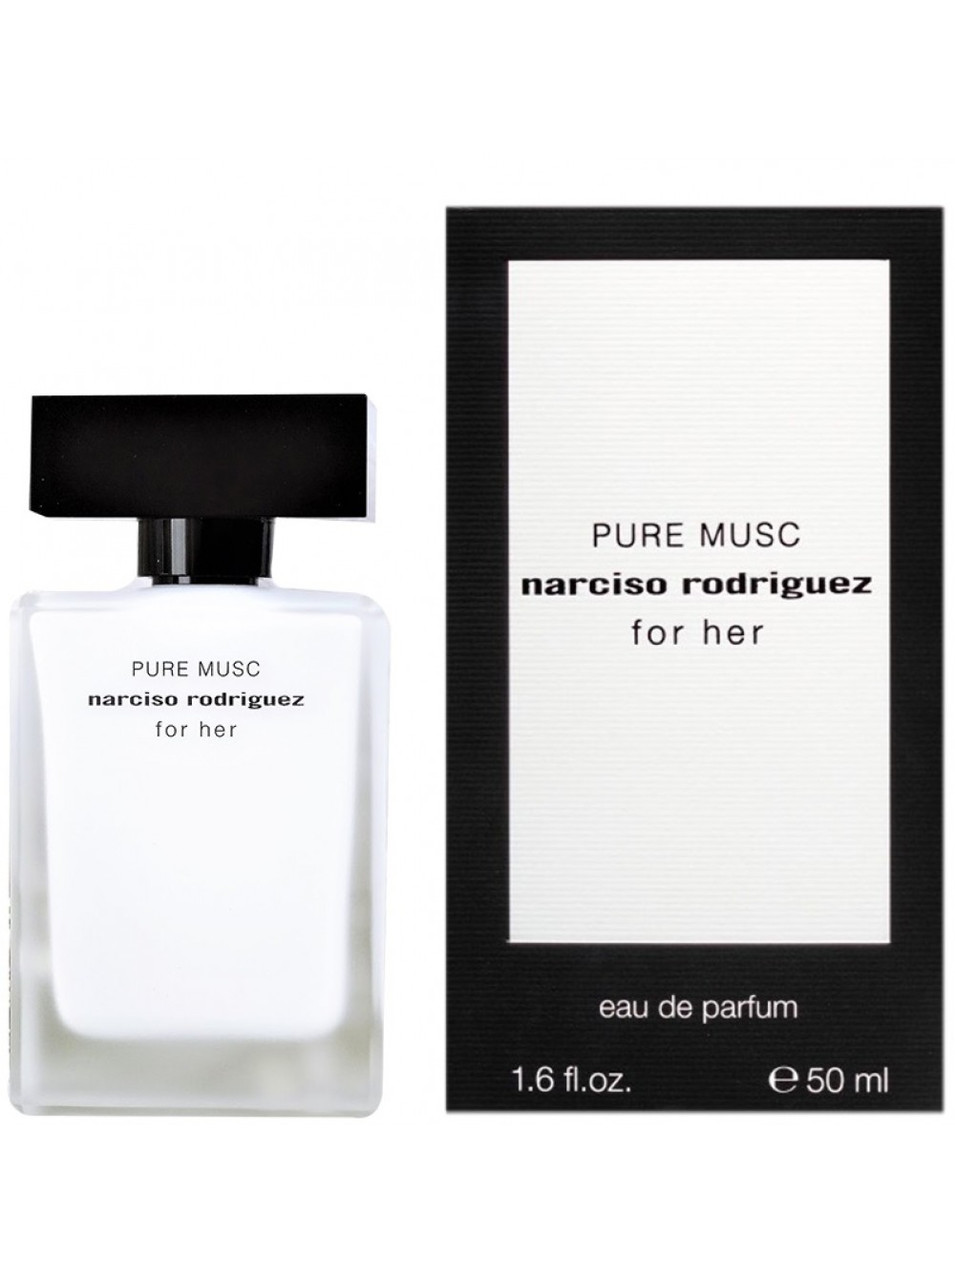 All of me narciso rodriguez. Narciso Rodriguez Pure Musk. Narciso Rodriguez for her Narciso Rodriguez 30. Pure Musk Narciso Rodriguez for her. Narciso Narciso Rodriguez for women 50ml.